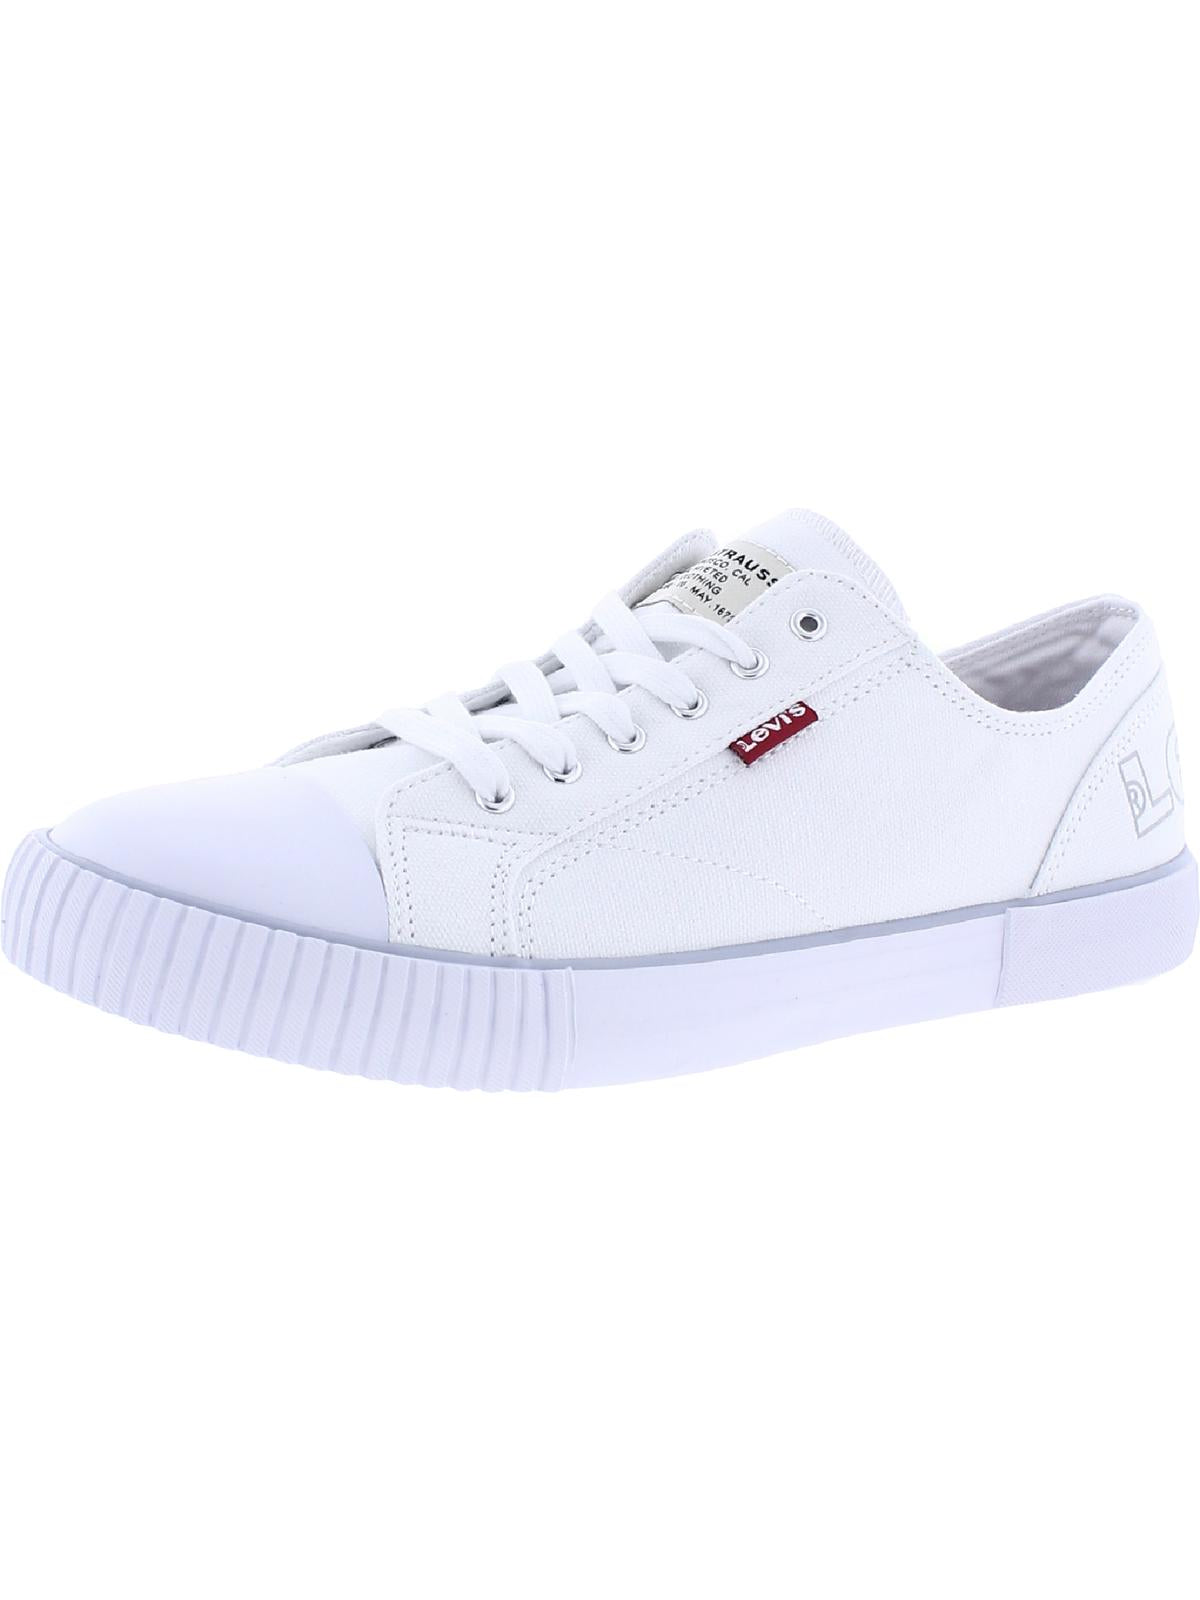 Levi's Anika Womens Fitness Lifestyle Casual And Fashion Sneakers In White